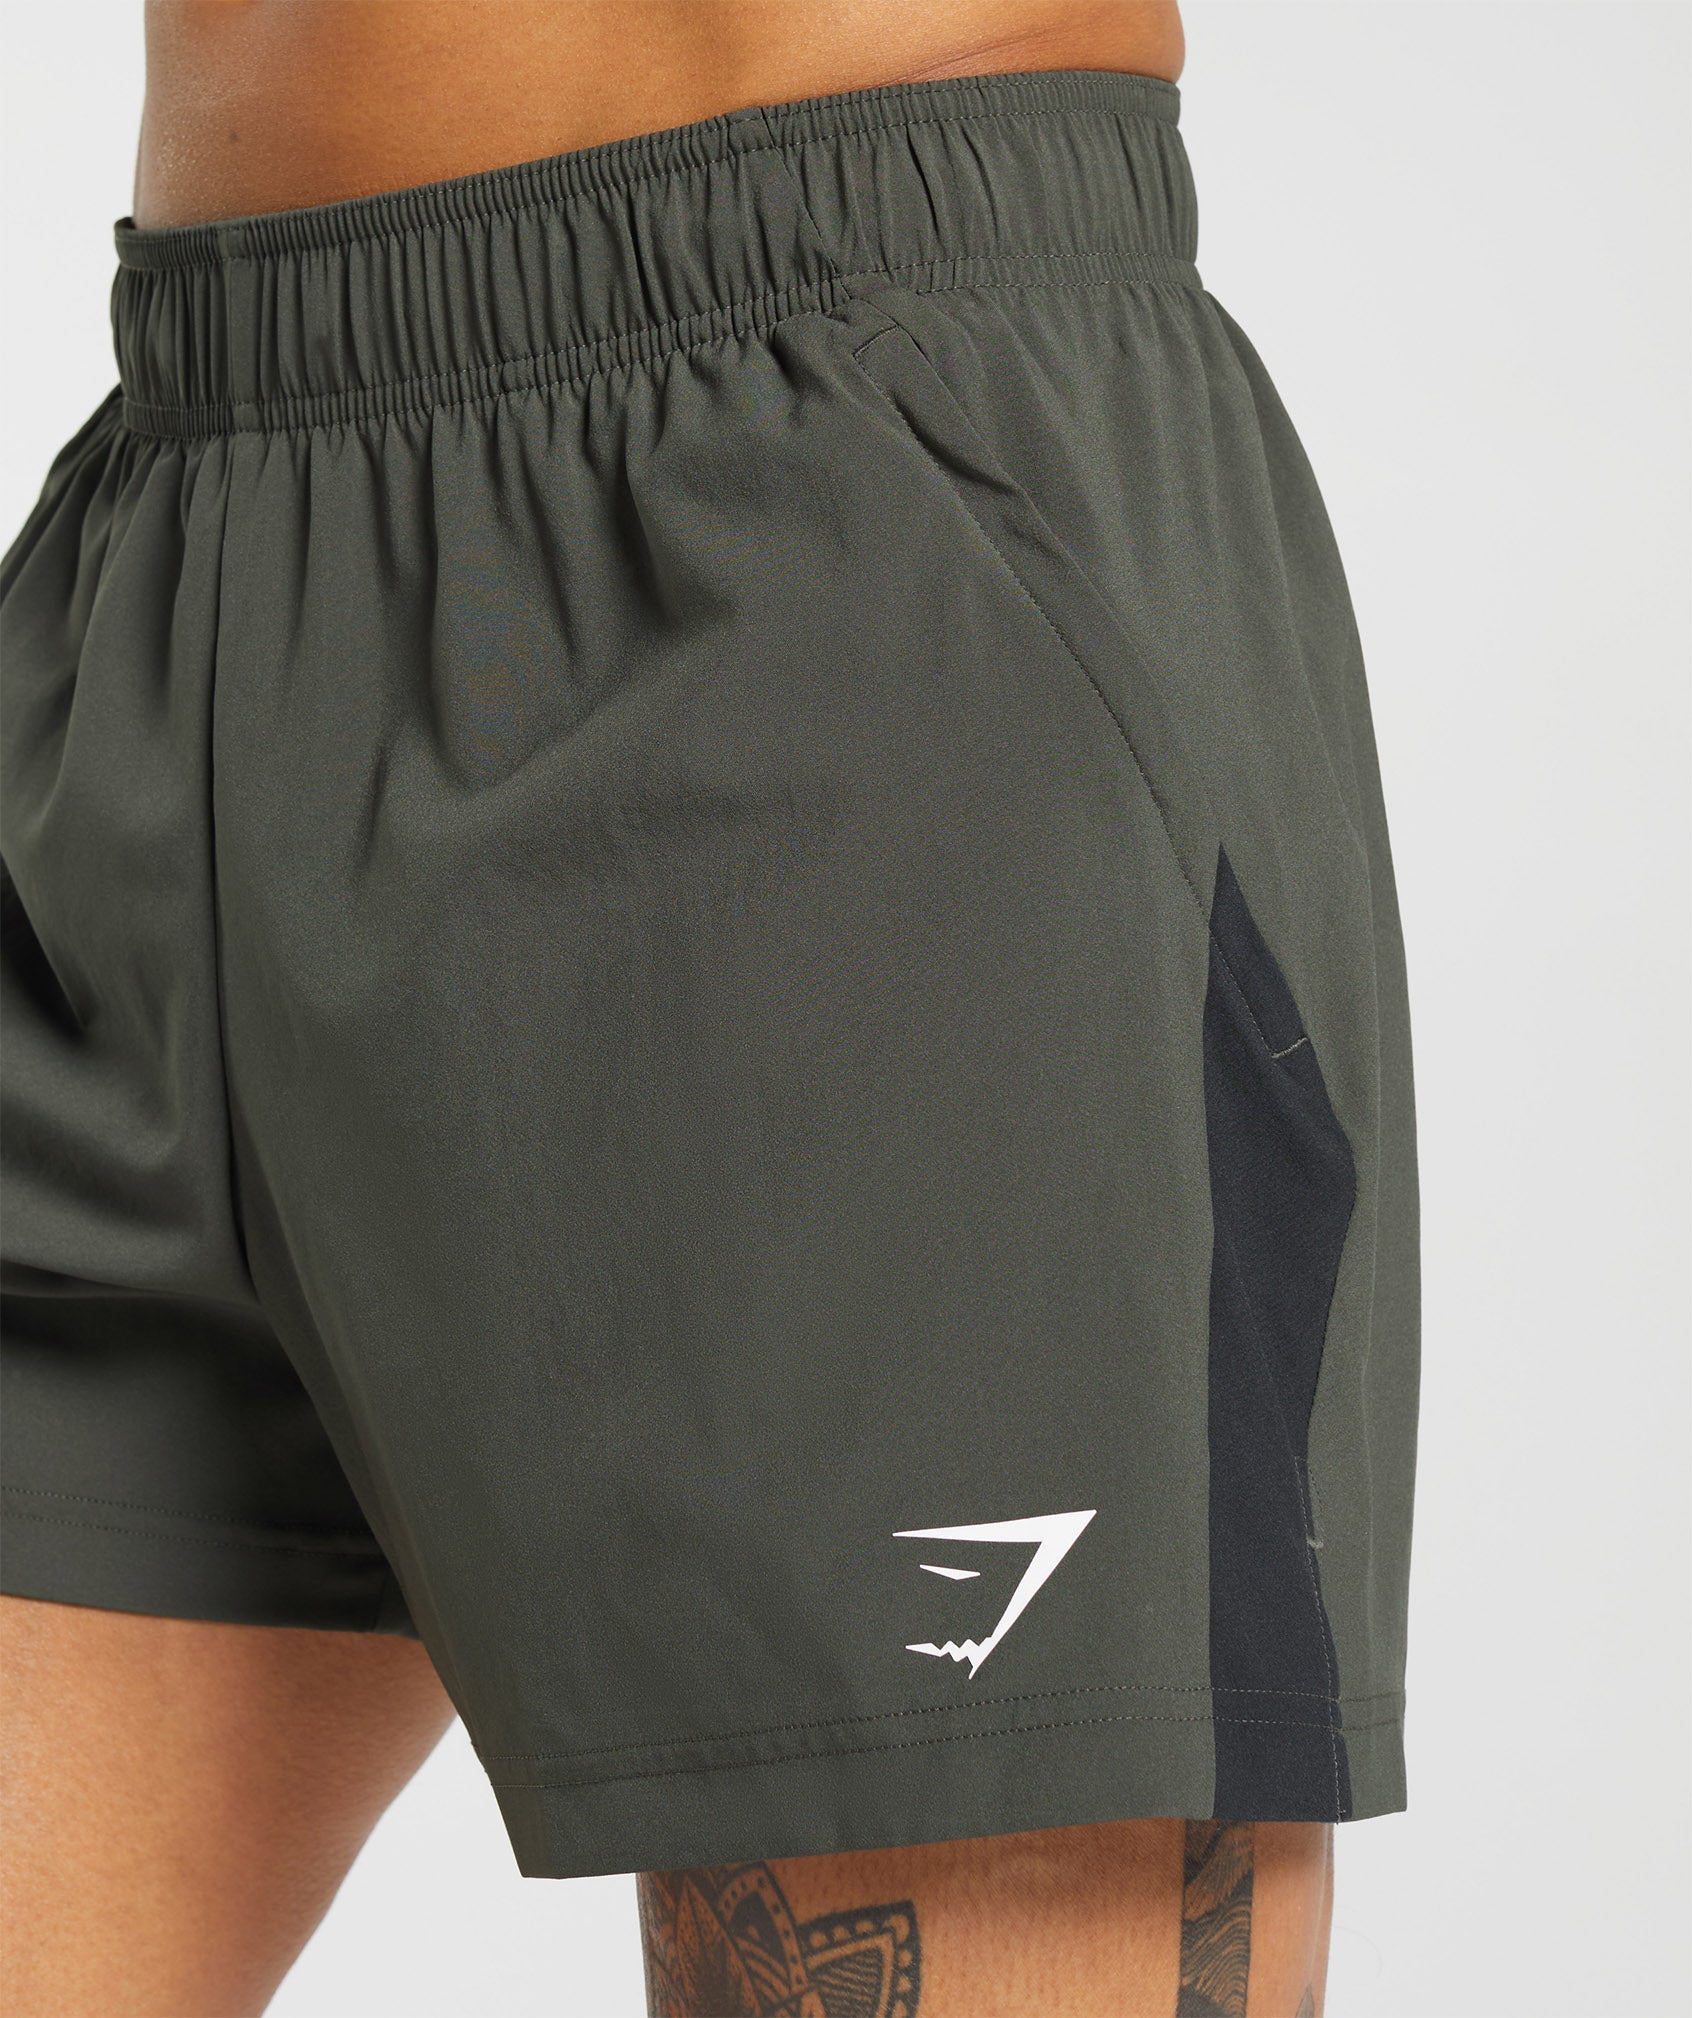 Sport 5" Shorts in Strength Green/Black - view 6